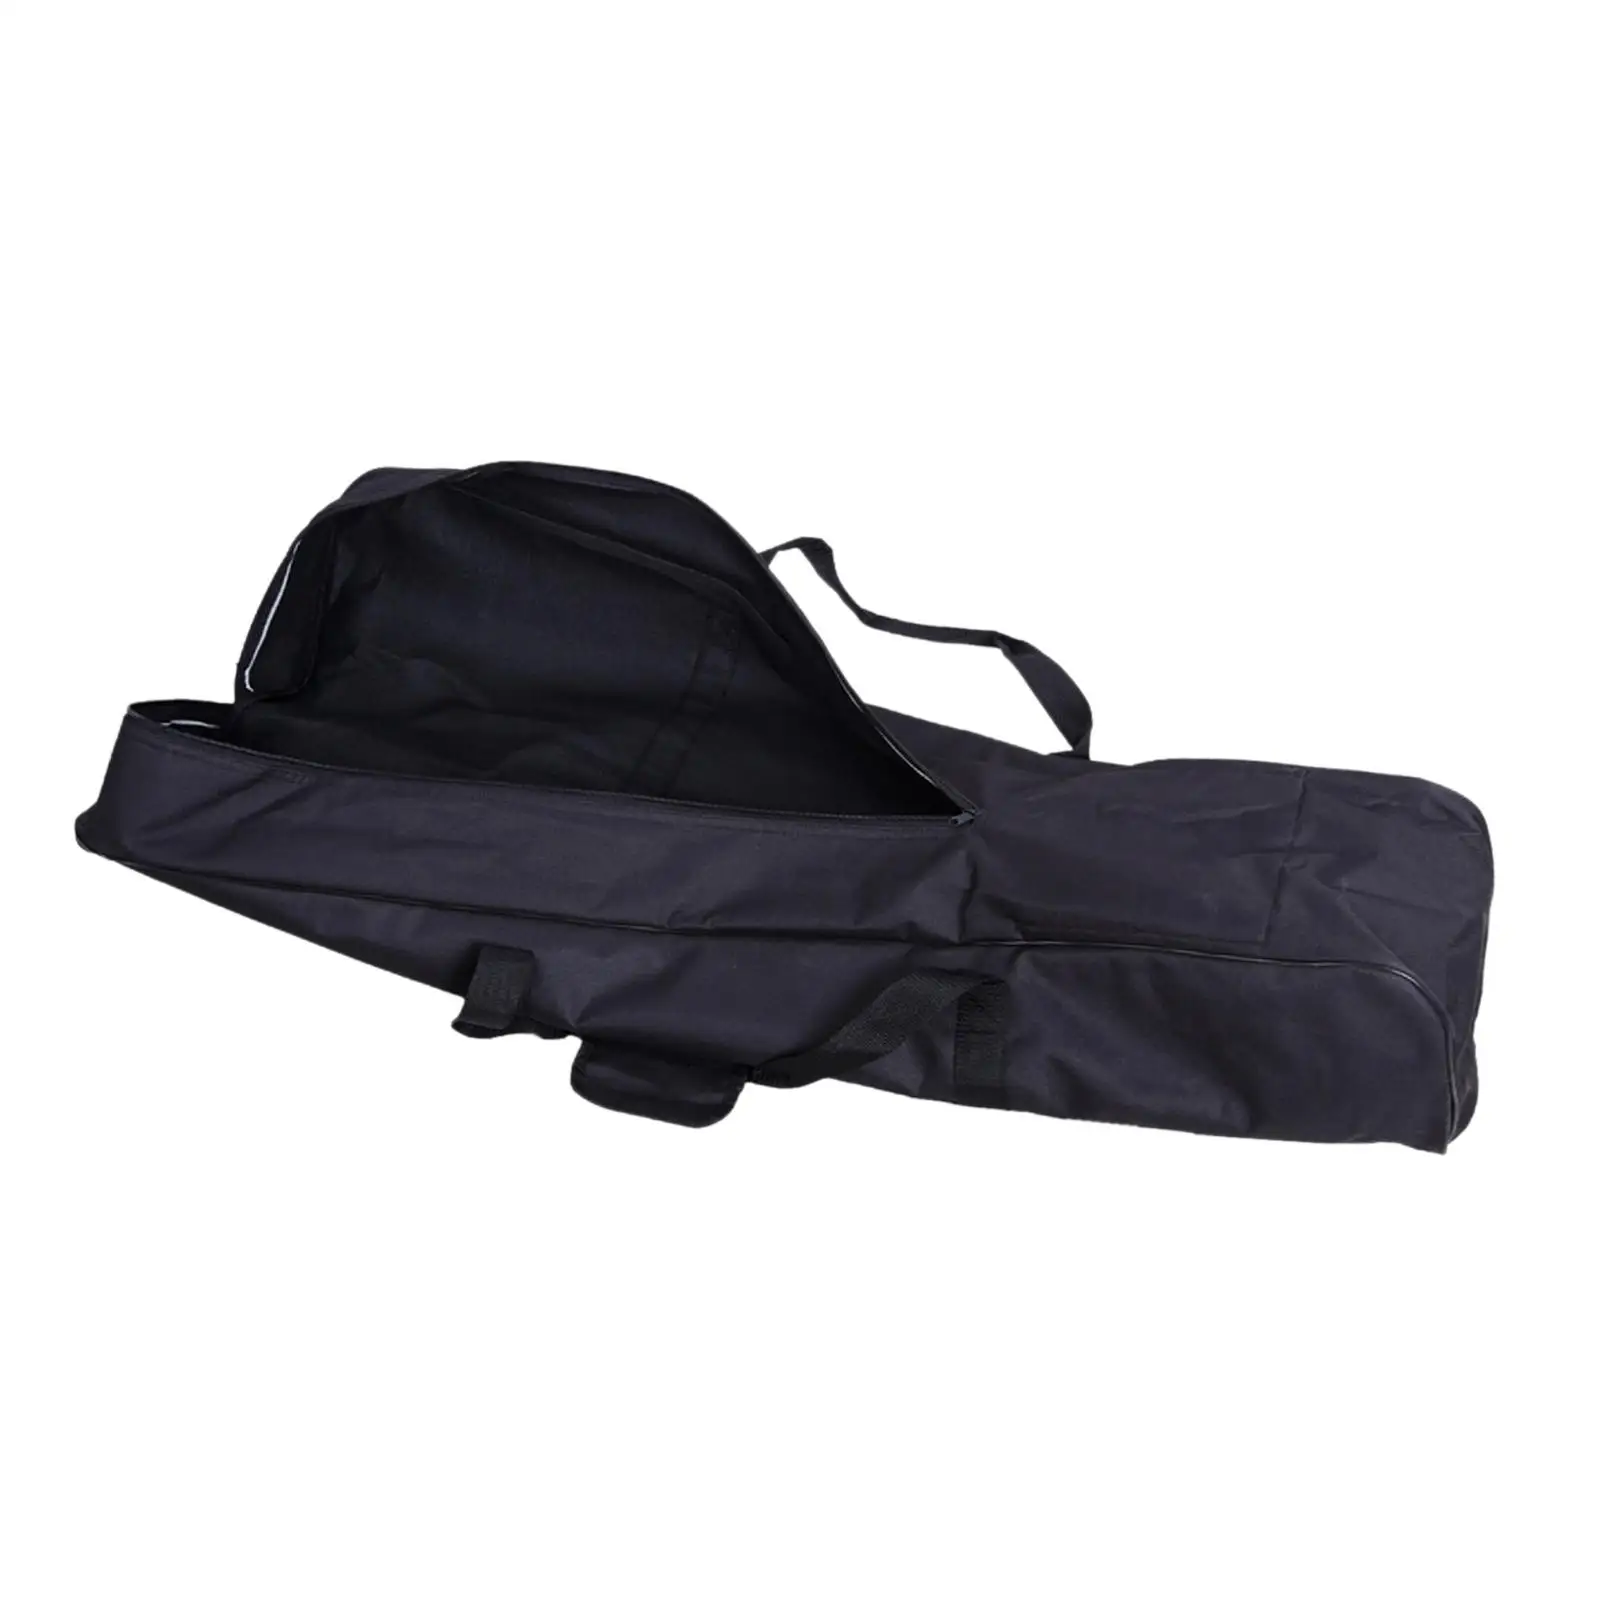 Telescope Bag Dual Use with Shoulder Straps Shock Absorbent Waterproof Tripod